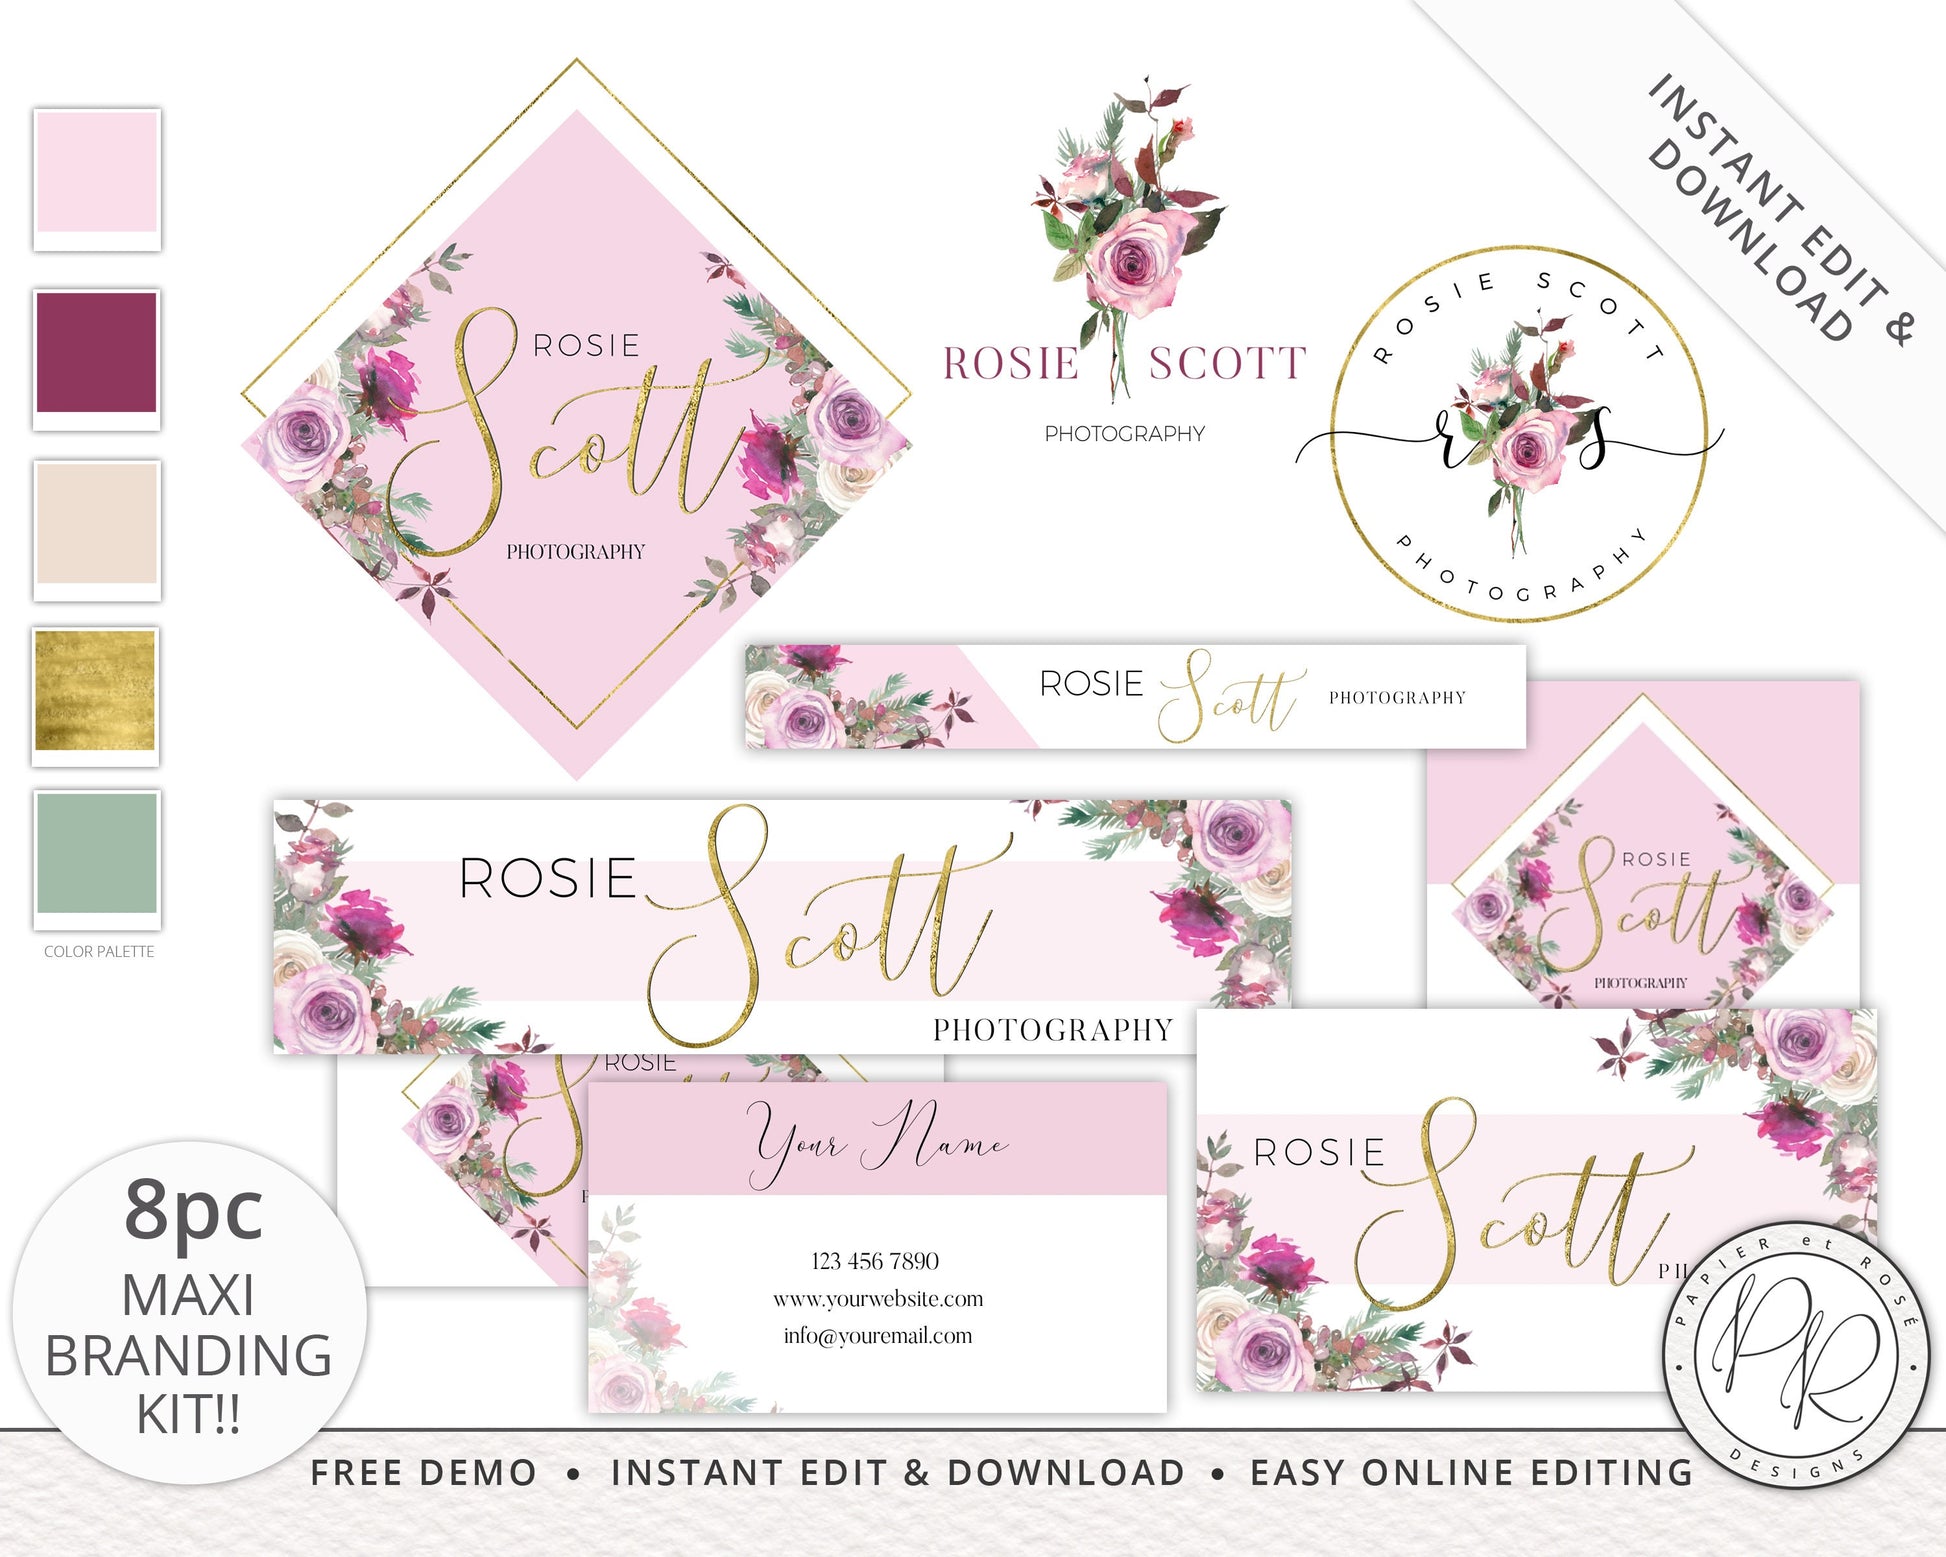 8pc Maxi Branding Package Instant Edit & Download Geometric and Watercolor Floral  | Edit Yourself Online! | Premade Business logo RS-001